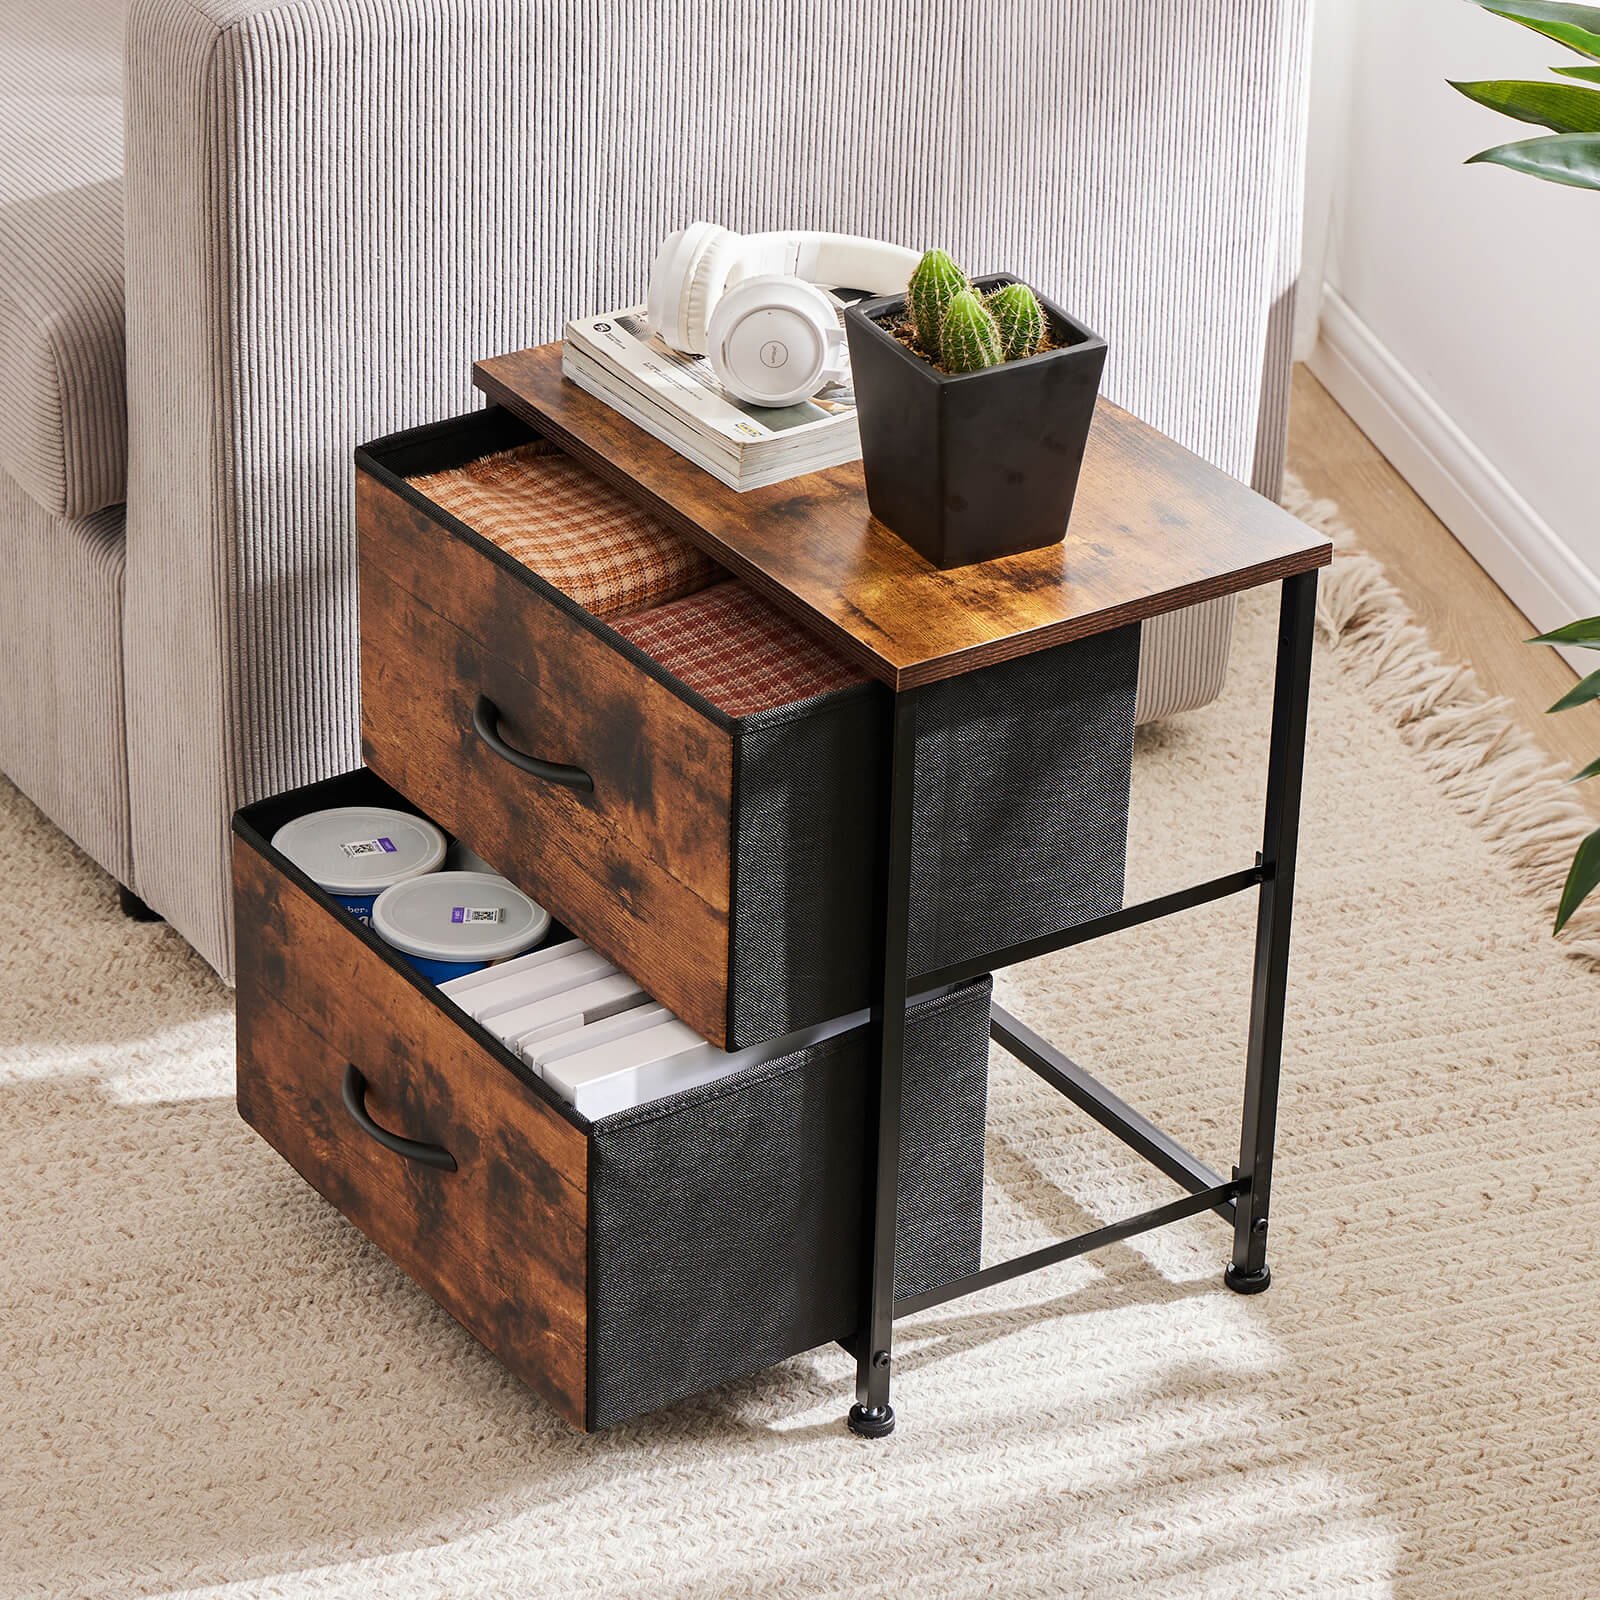 2 Piece Nightstand Set - 2 Storage Drawers, Bedside Furniture End Table, Suitable for Living Room, Bedroom, Closet